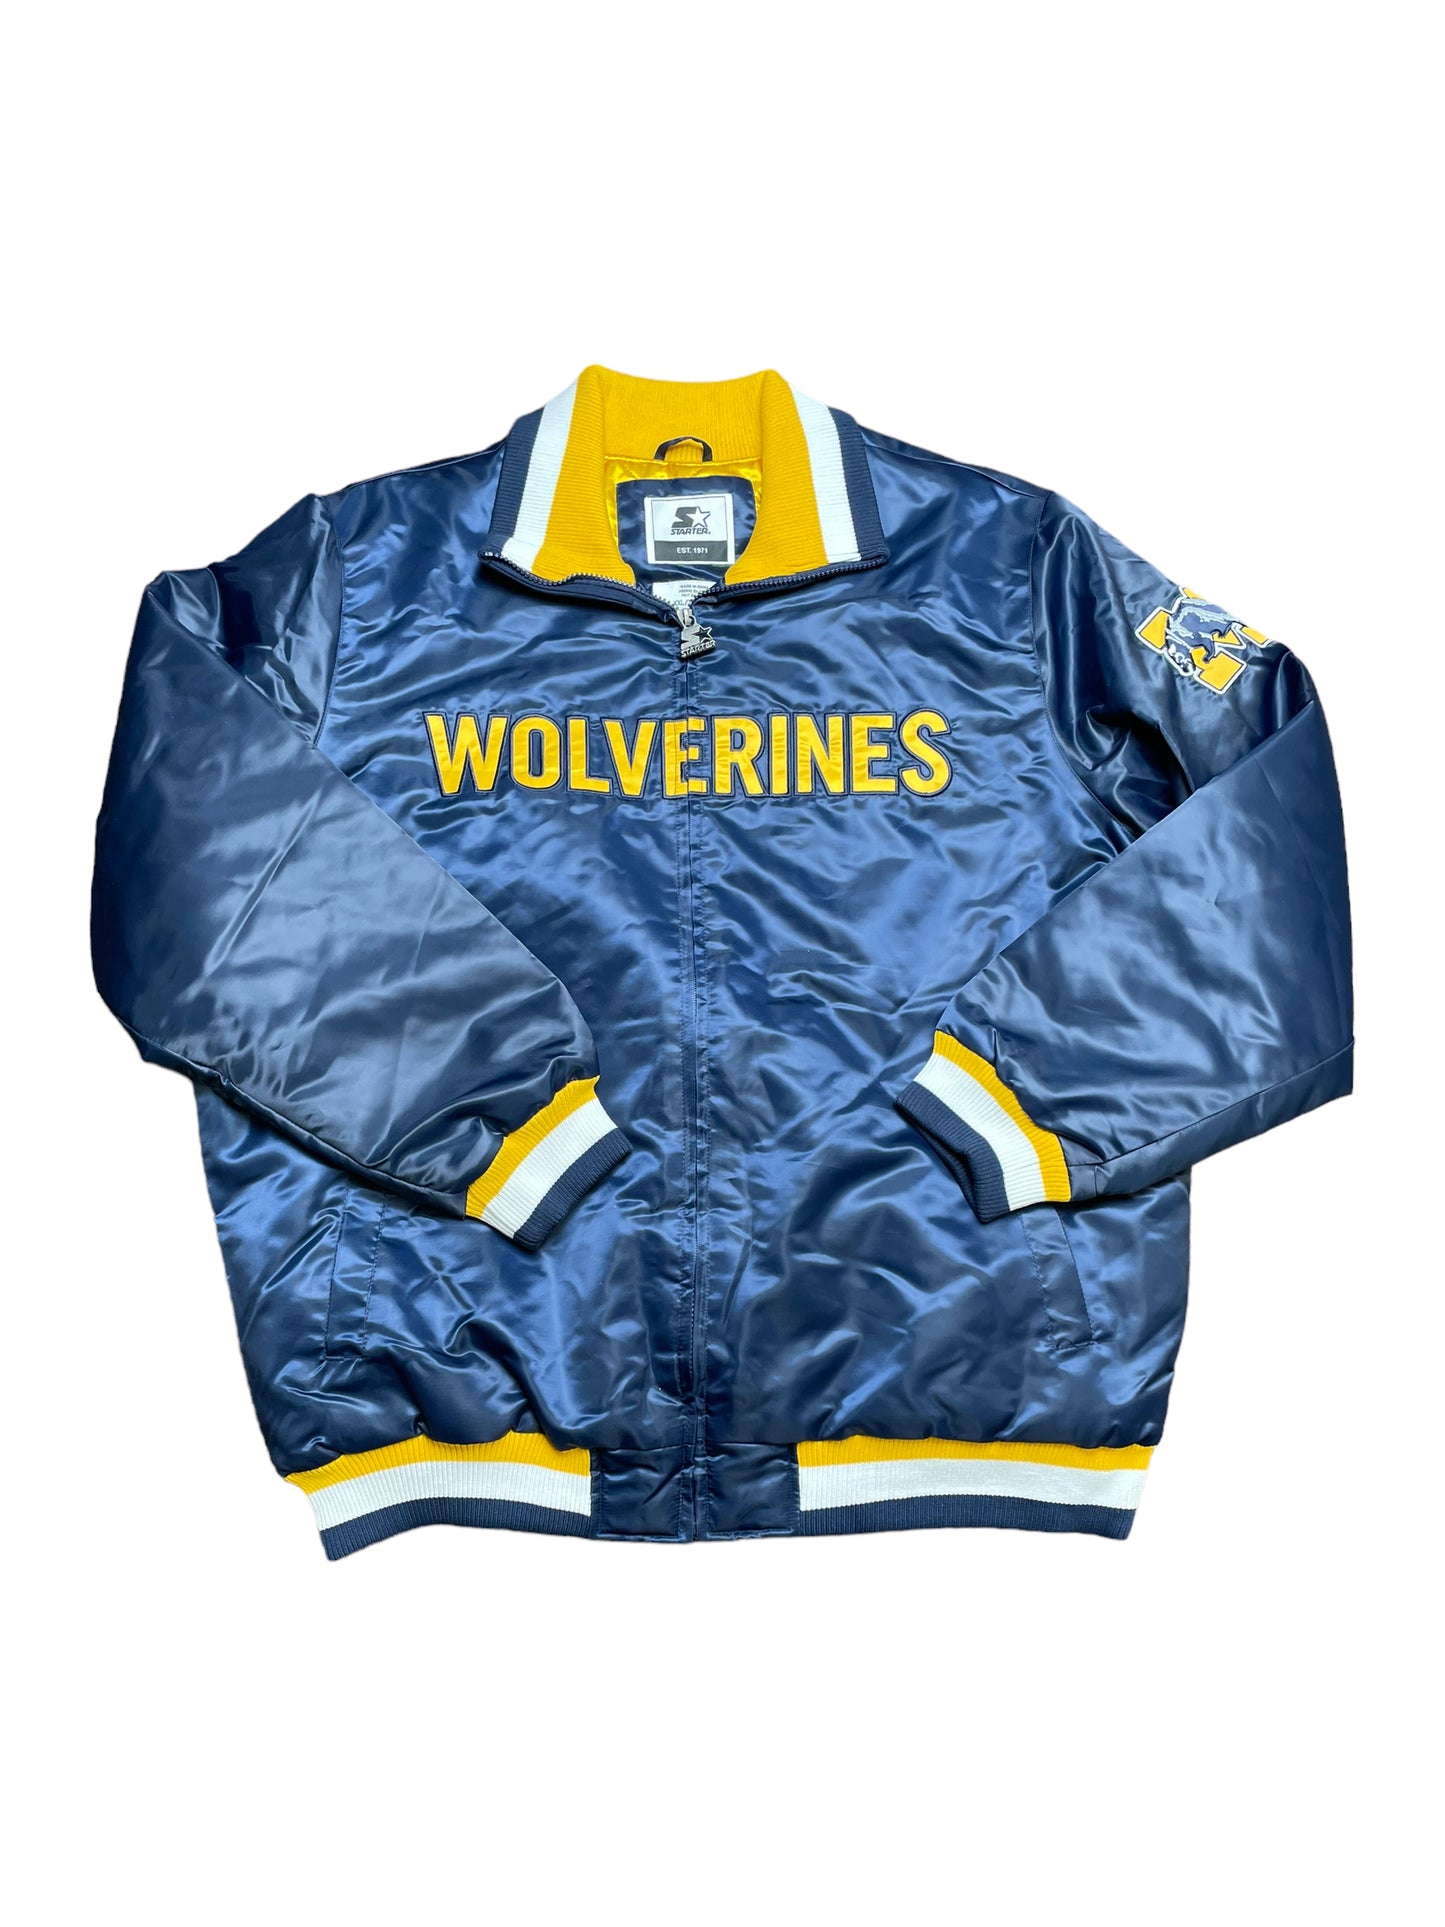 NEW WITH TAGS UNIVERSITY OF MICHIGAN WOLVERINES STARTER JACKET XXLARGE